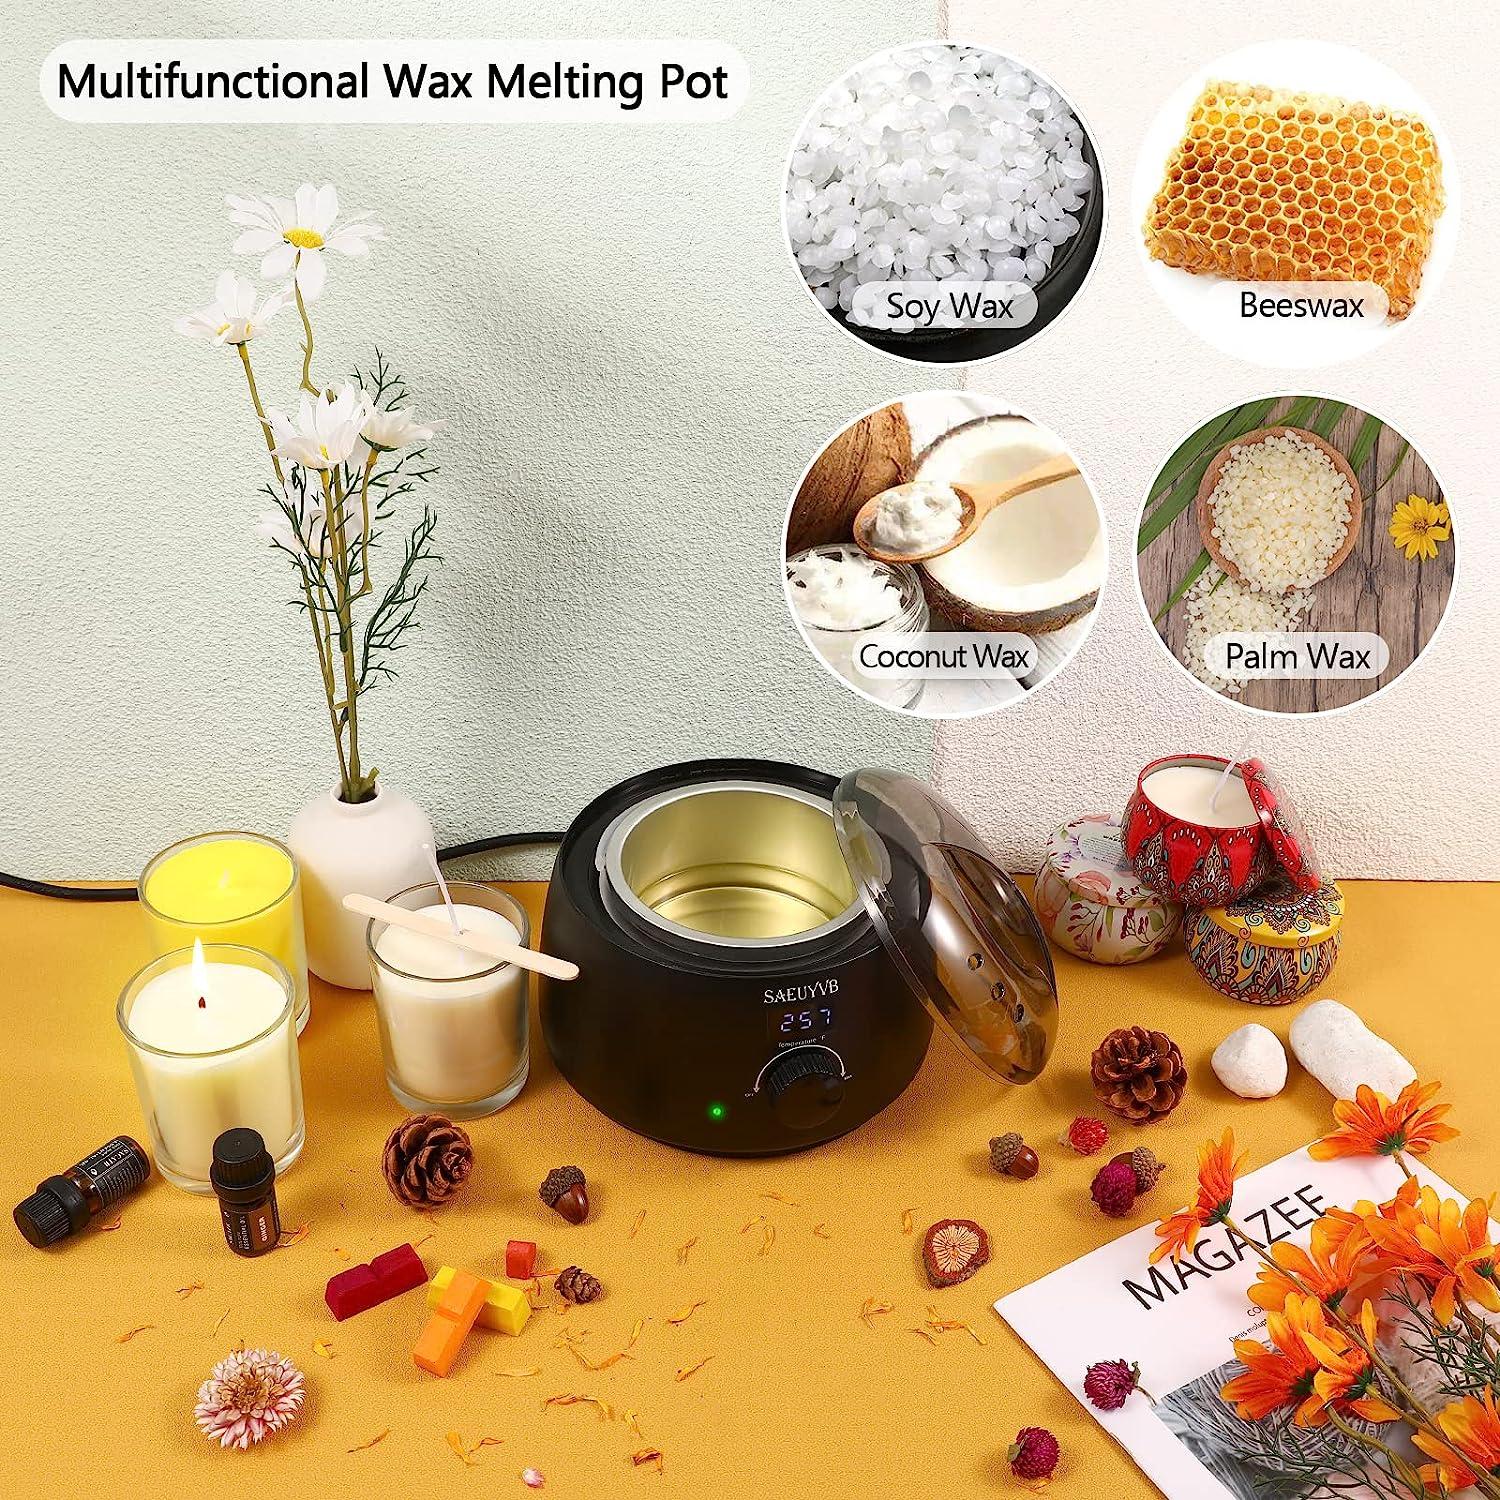 Wax Melter for Candle Making,Candle Melting Pot,Candle Wax  Melter,Multifunctional Wax Melting Tool with LED Temperature Display